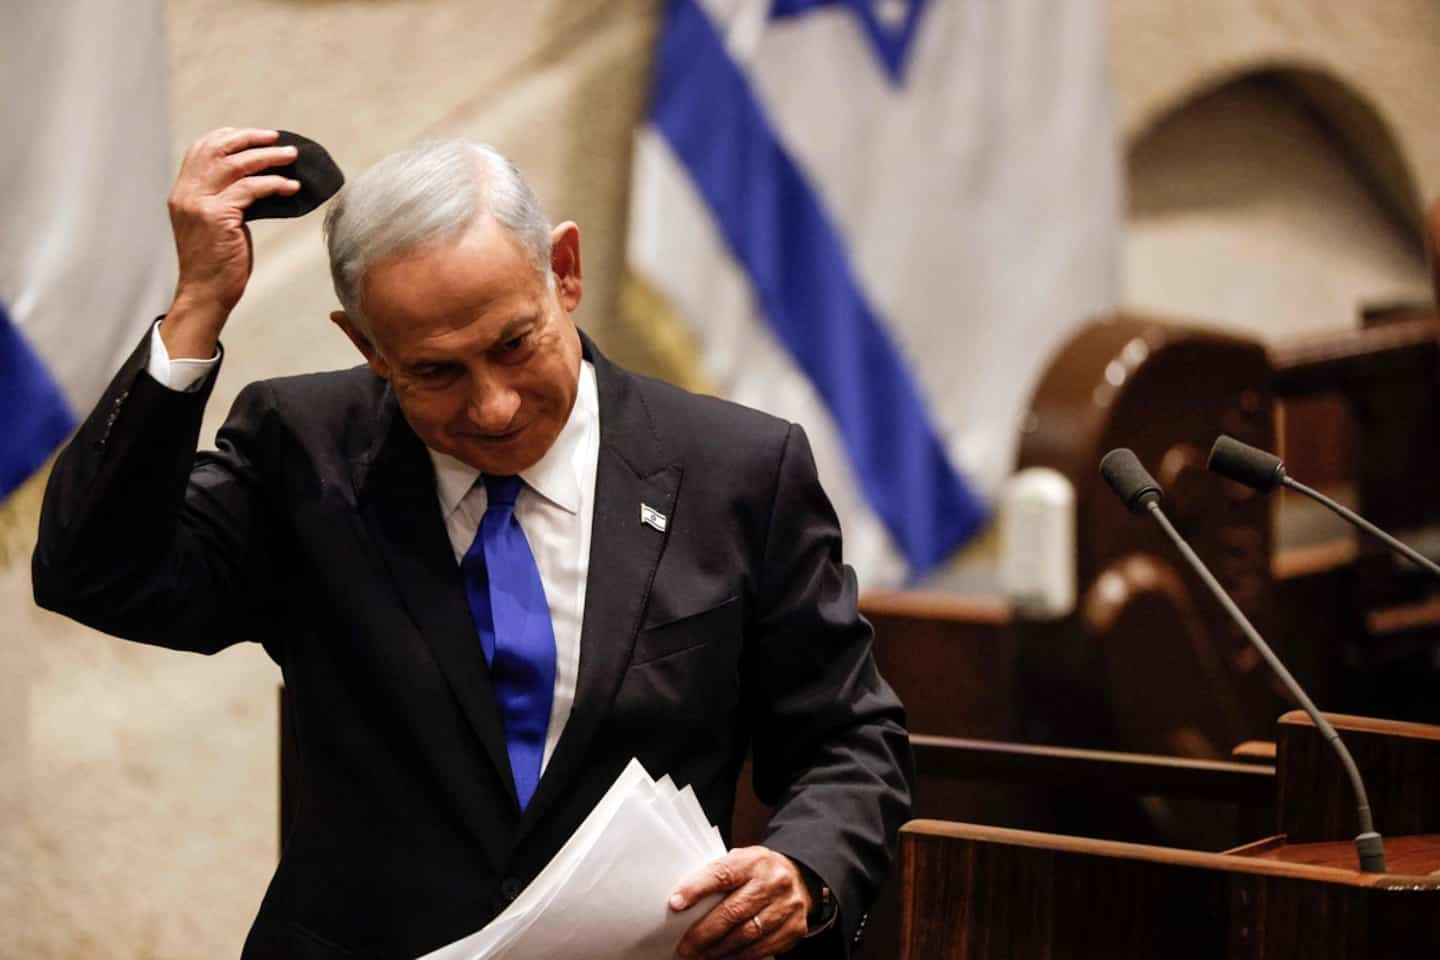 Return of Netanyahu, head of Israel's most right-wing government